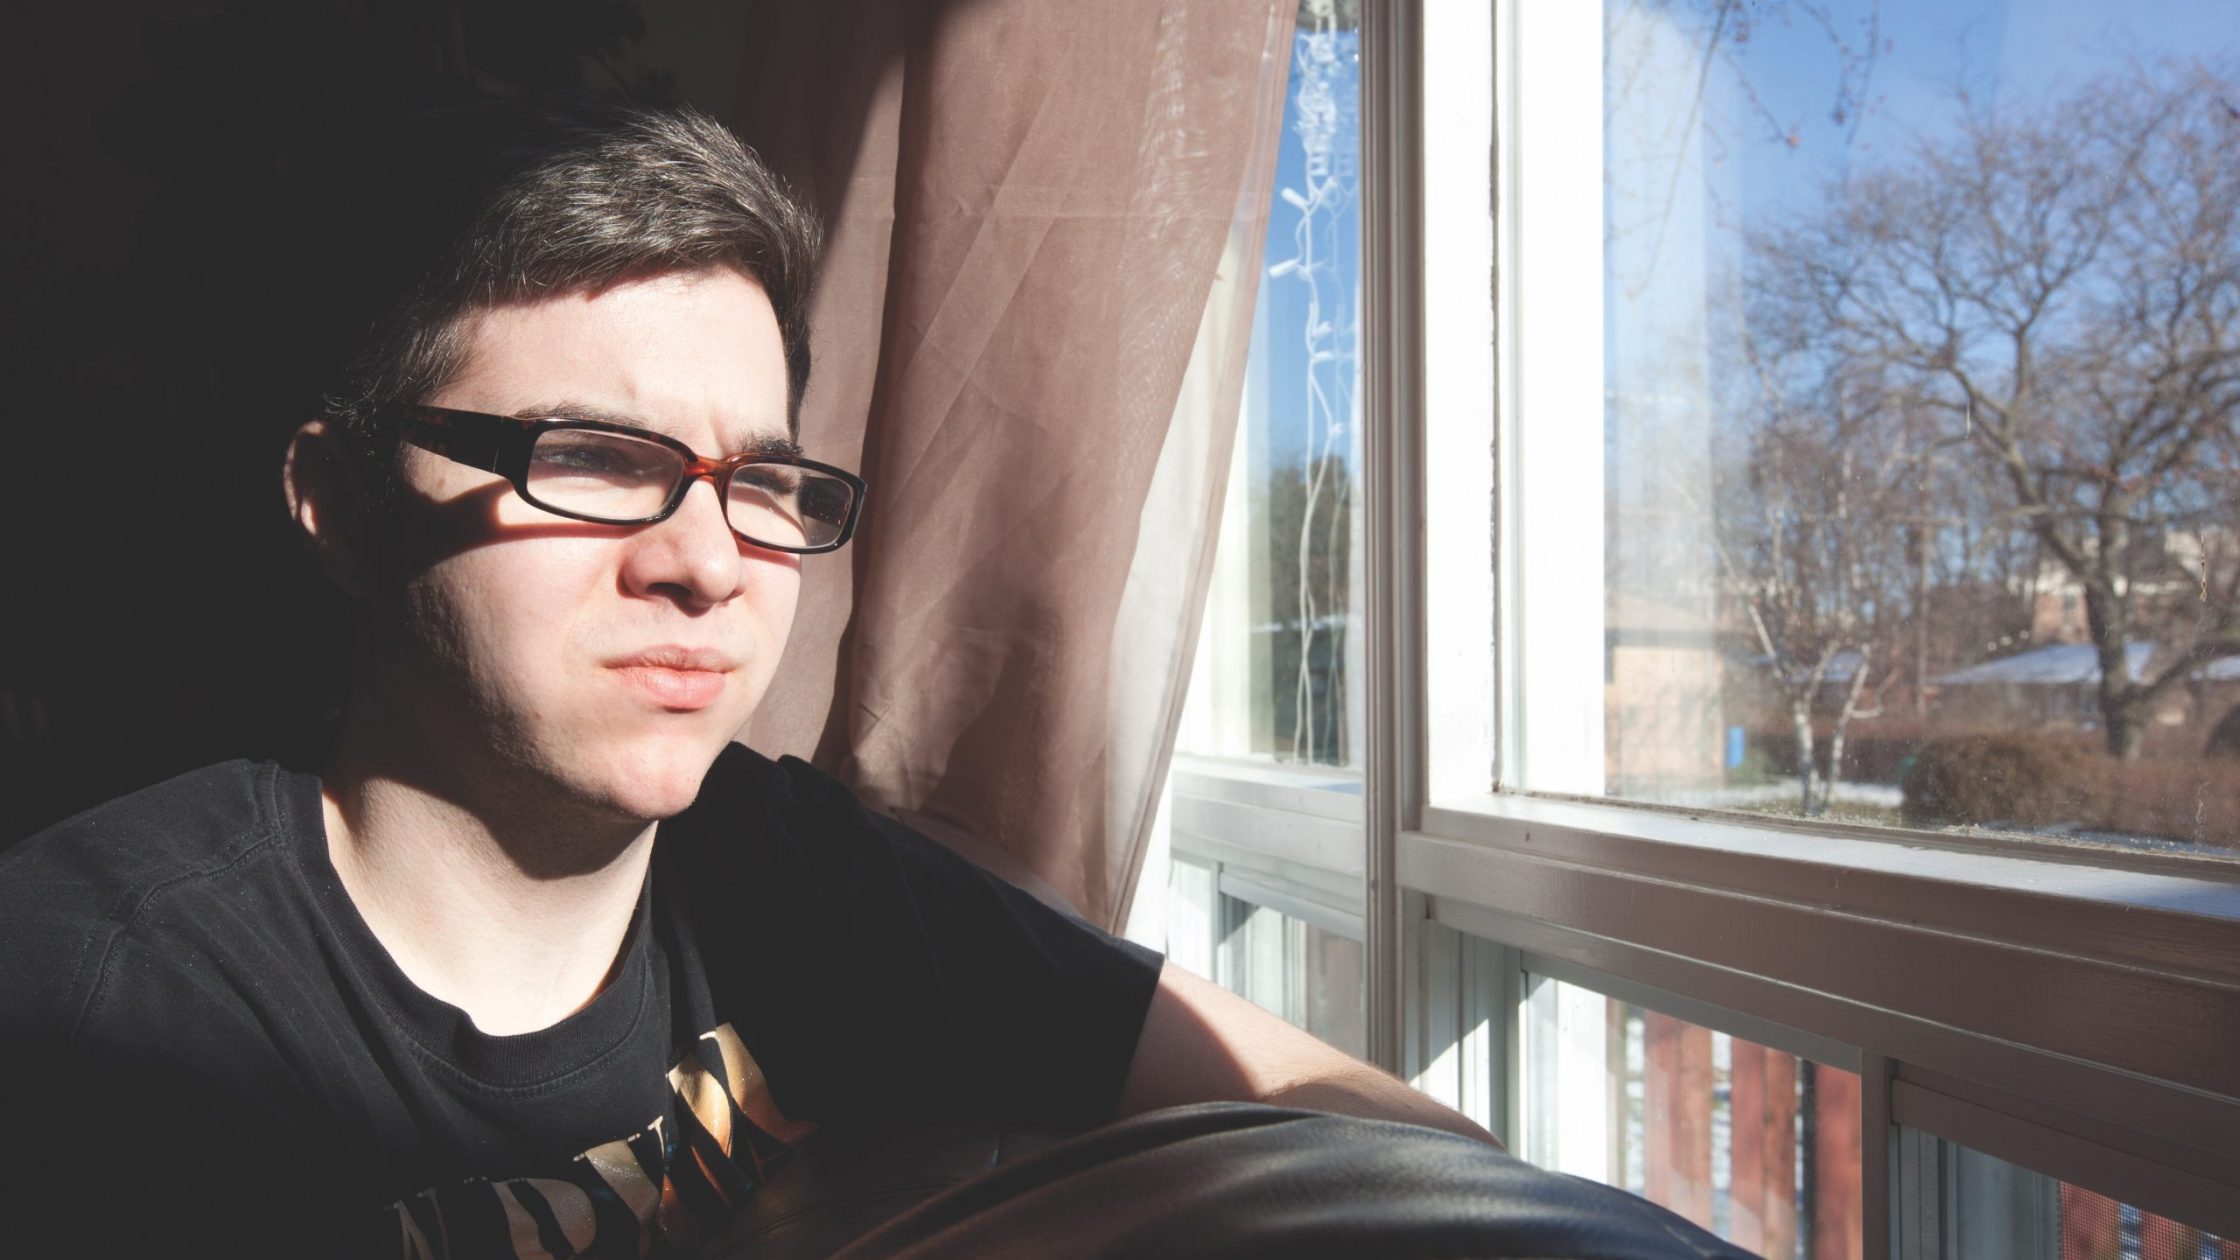 Young man with glasses looks out window